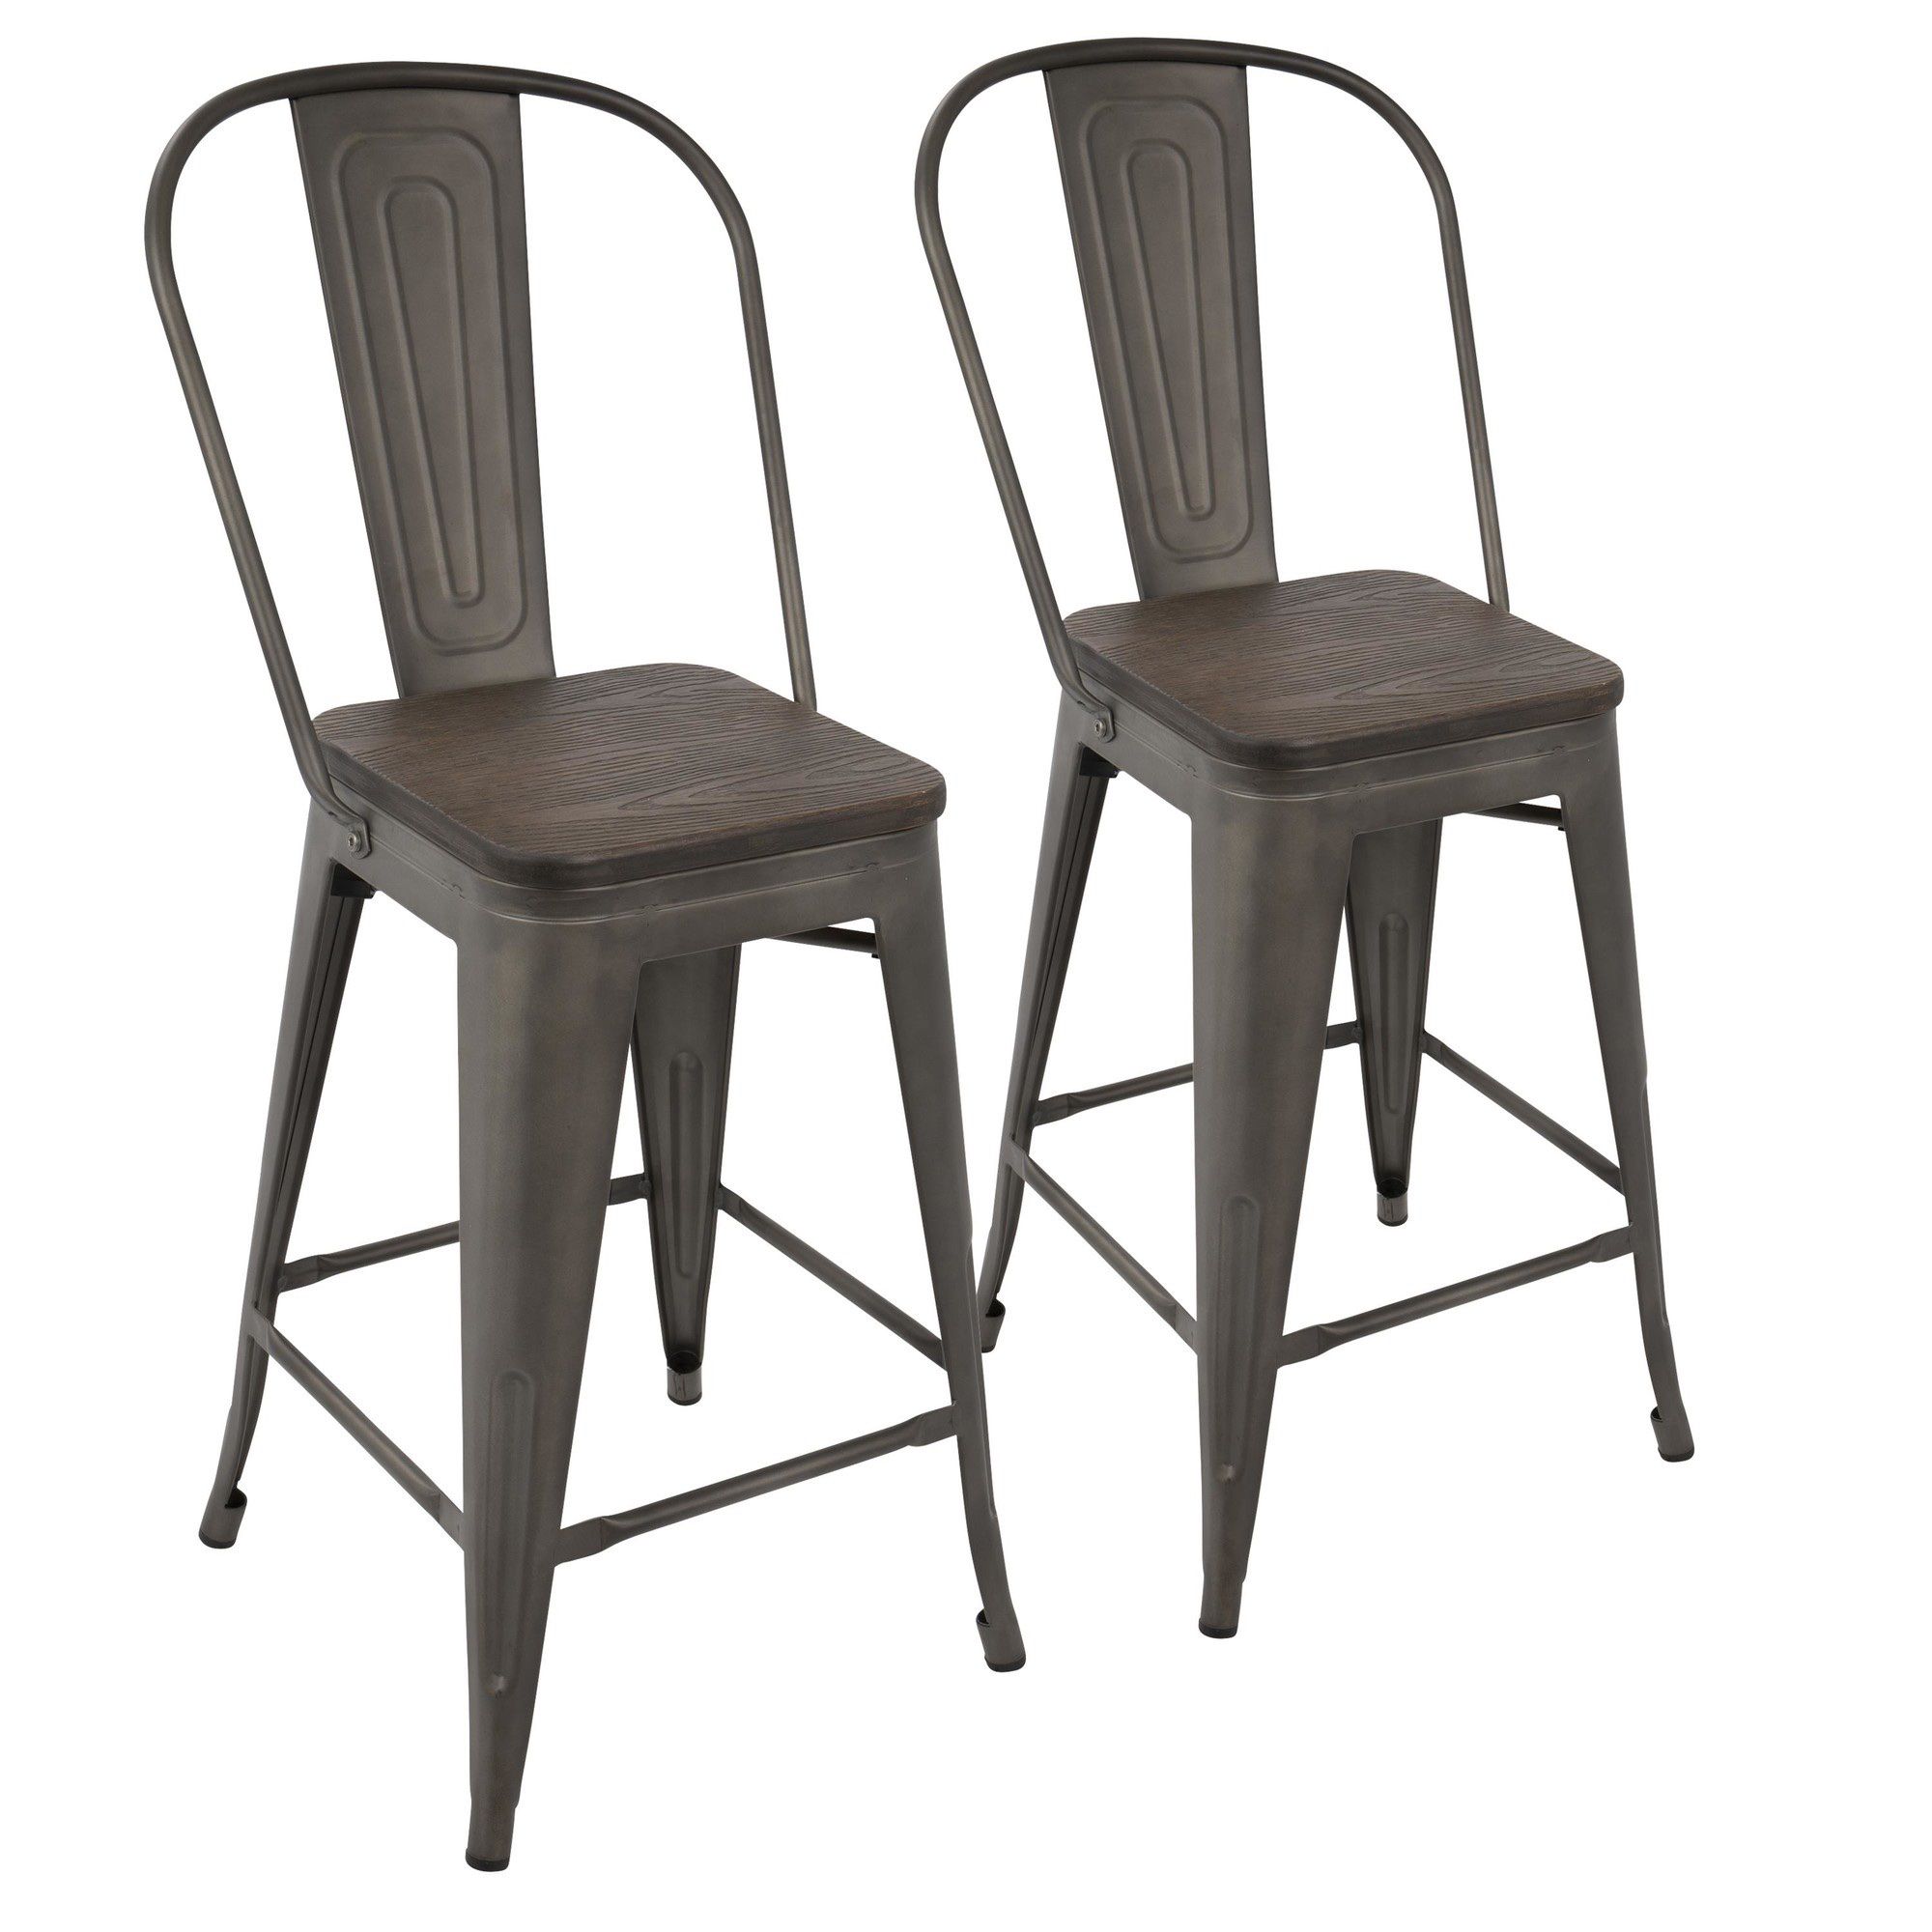 Metal and wood counter height stools - Set of 2